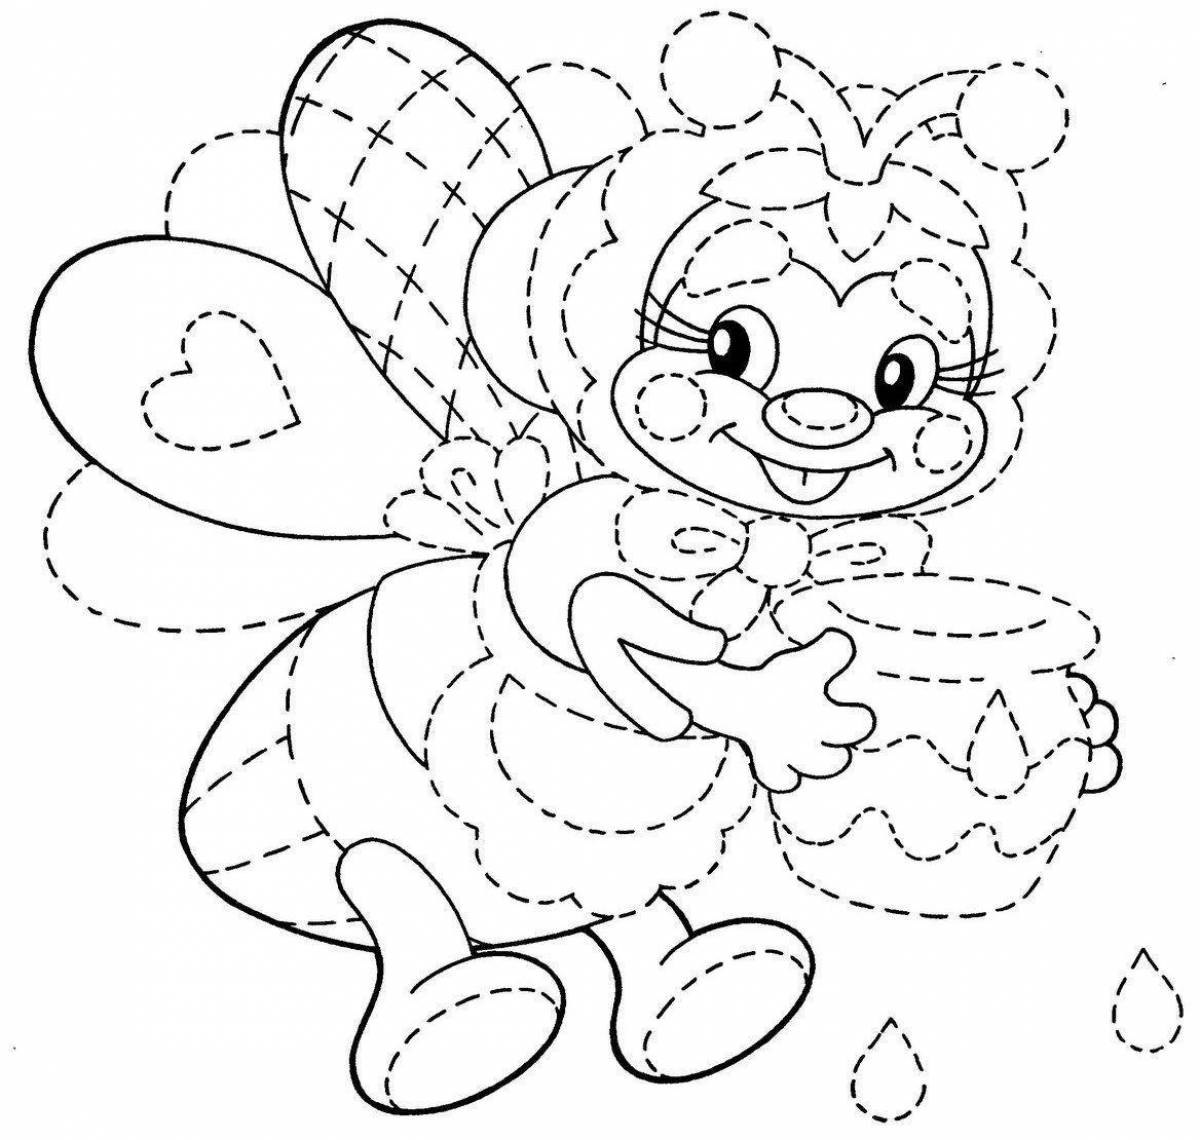 Delightful coloring book for girls 5-6 years old